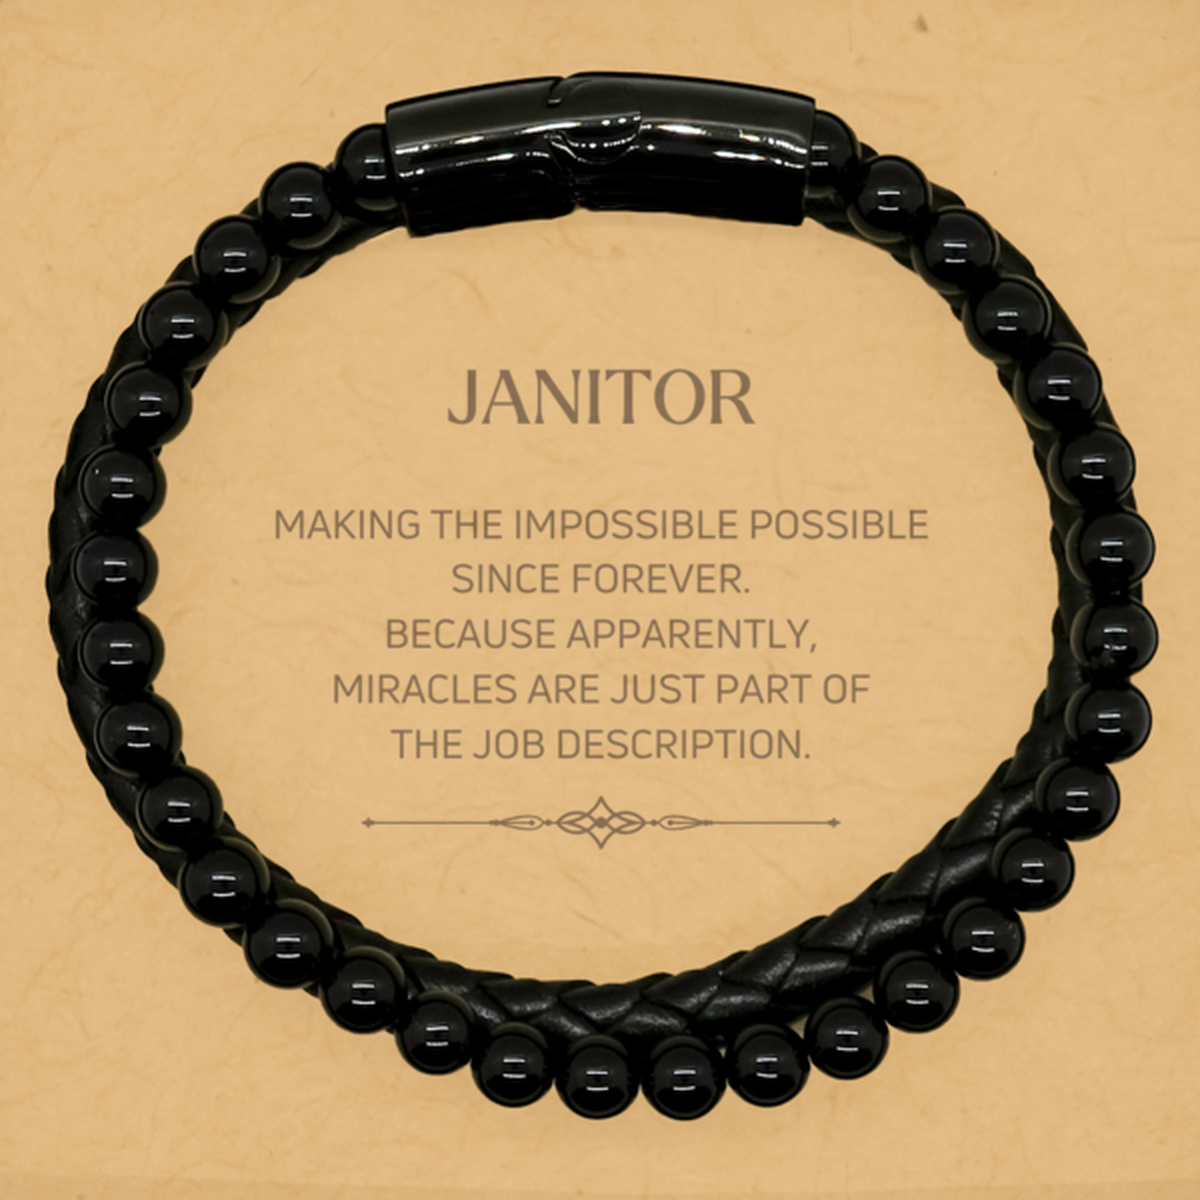 Funny Janitor Gifts, Miracles are just part of the job description, Inspirational Birthday Stone Leather Bracelets For Janitor, Men, Women, Coworkers, Friends, Boss